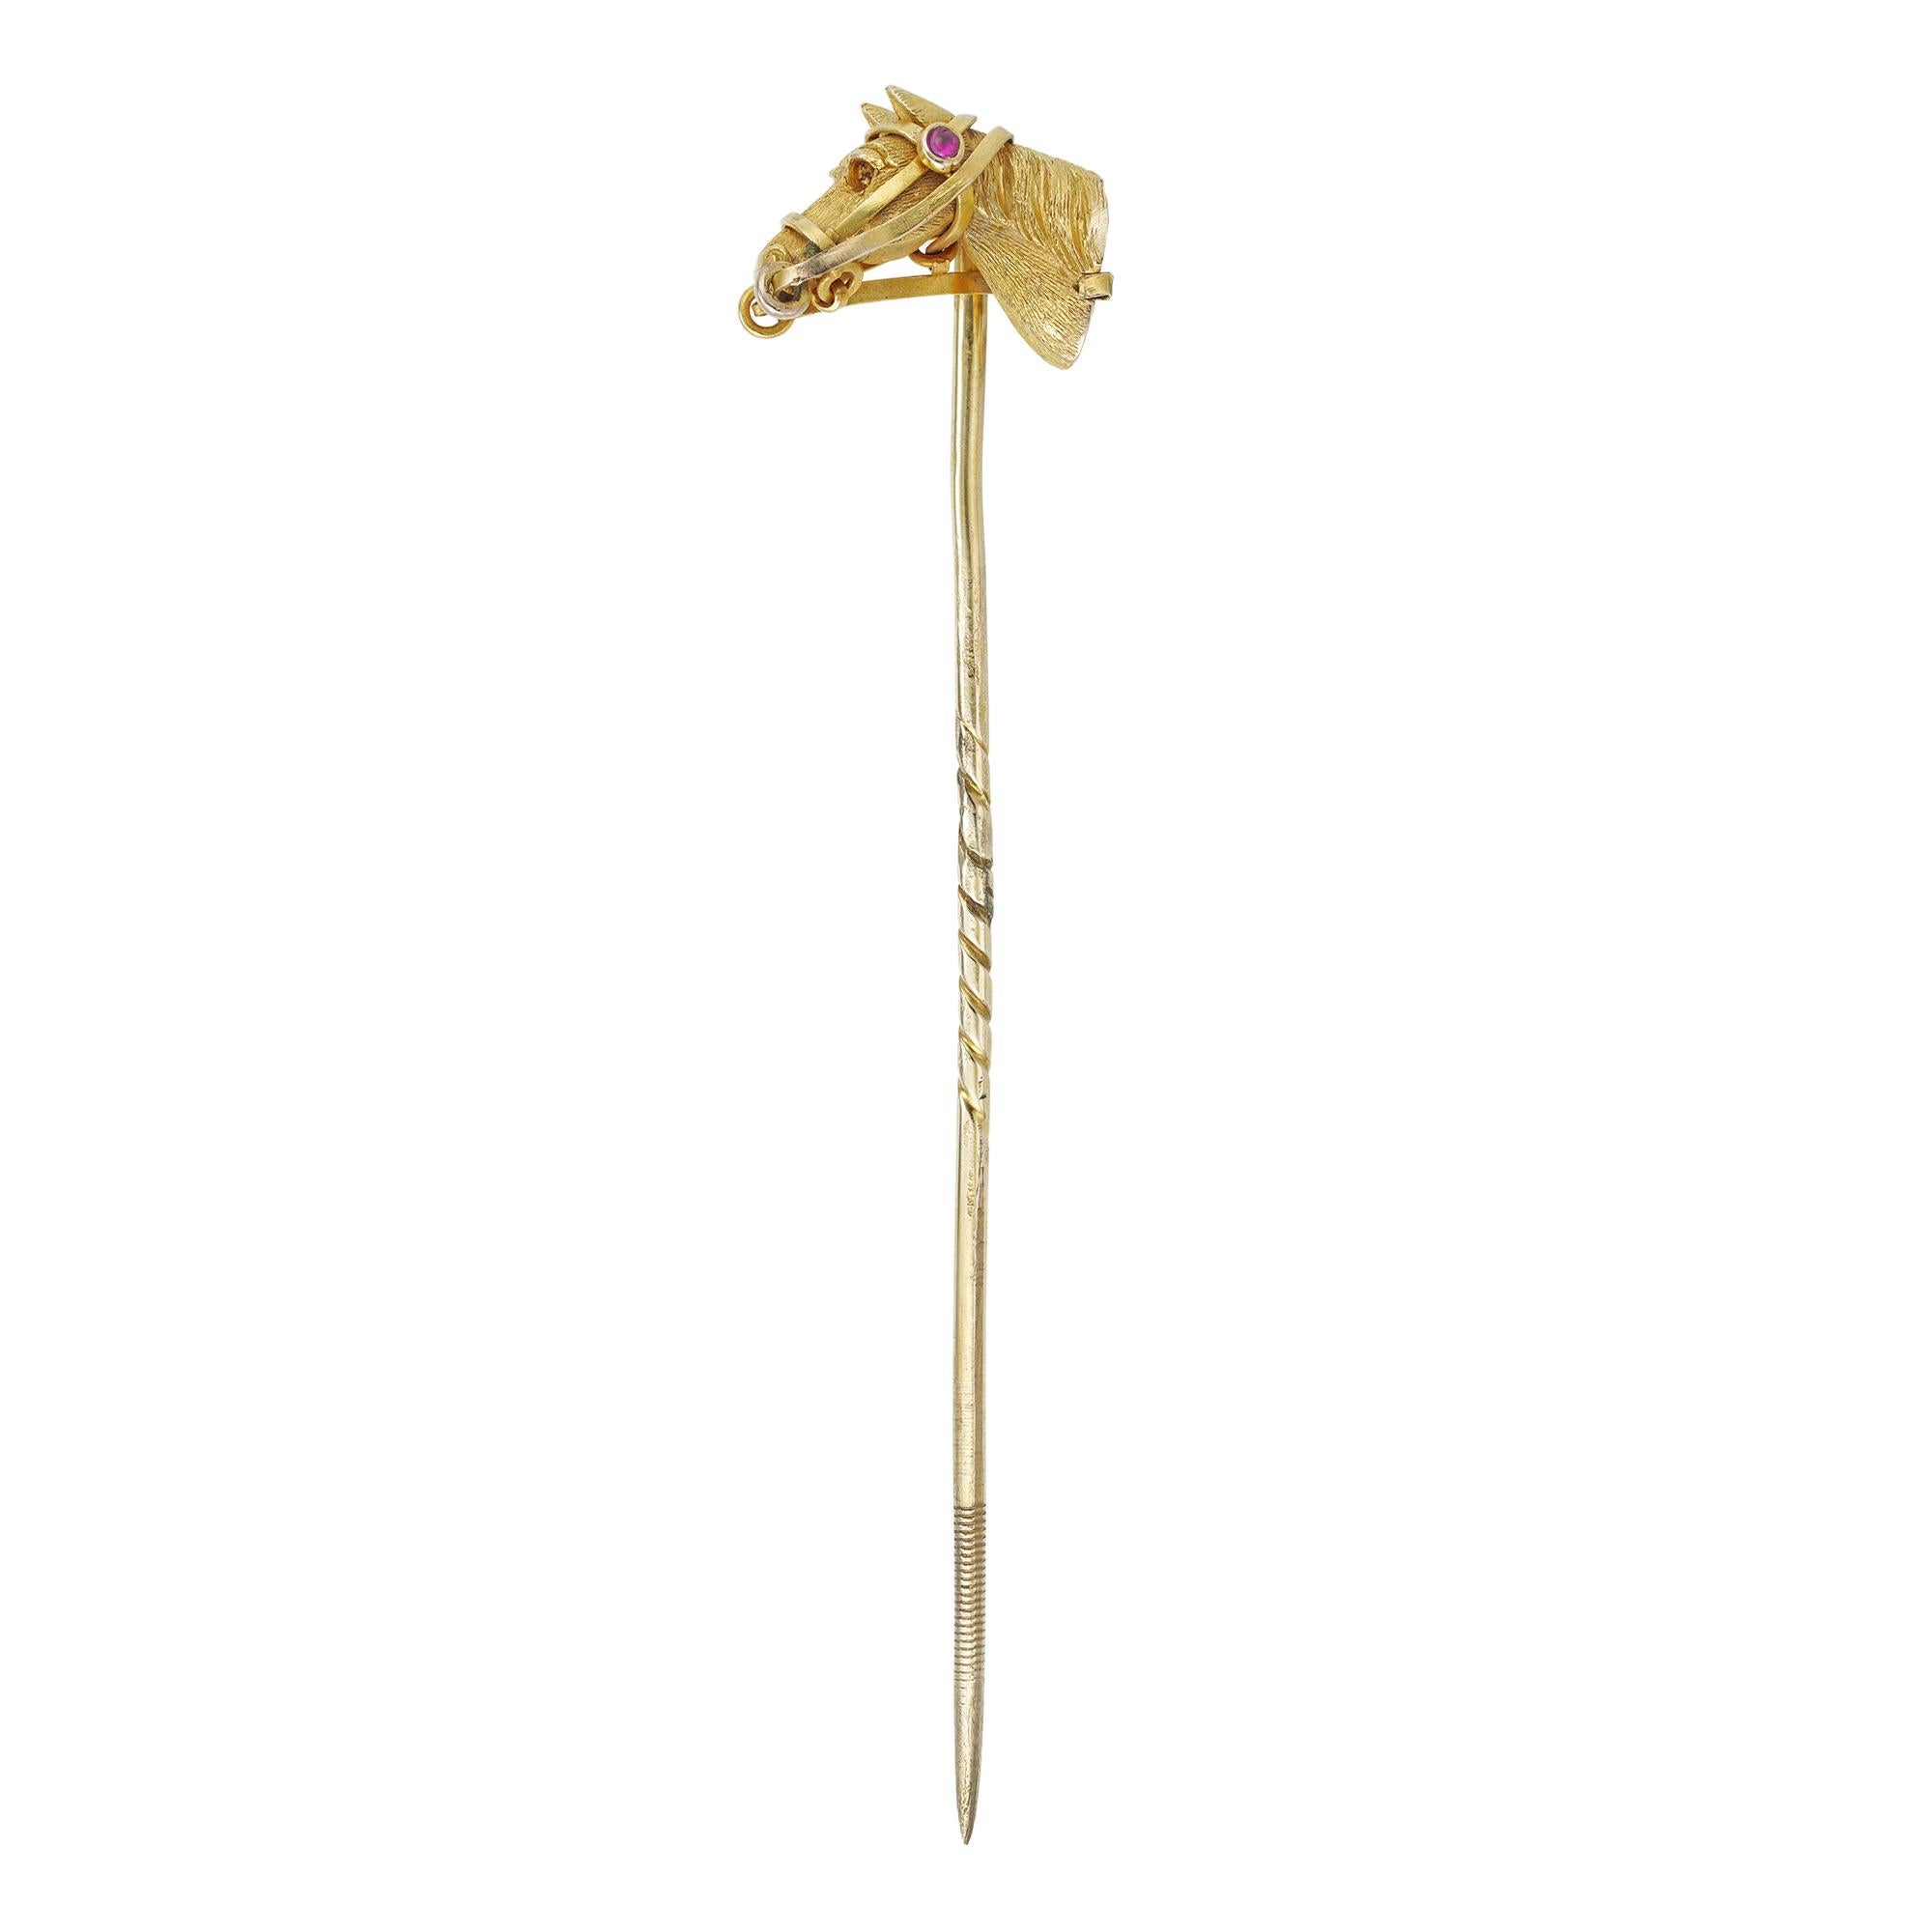 An Edwardian horse-head stick-pin, the realistically carved horse head, set with a cabochon-cut ruby, made in yellow gold with gold pin fitting, circa 1905, the jewelled part measuring 1.5 x 1.1cm, gross weight 4.4 grams.

This wonderful Edwardian